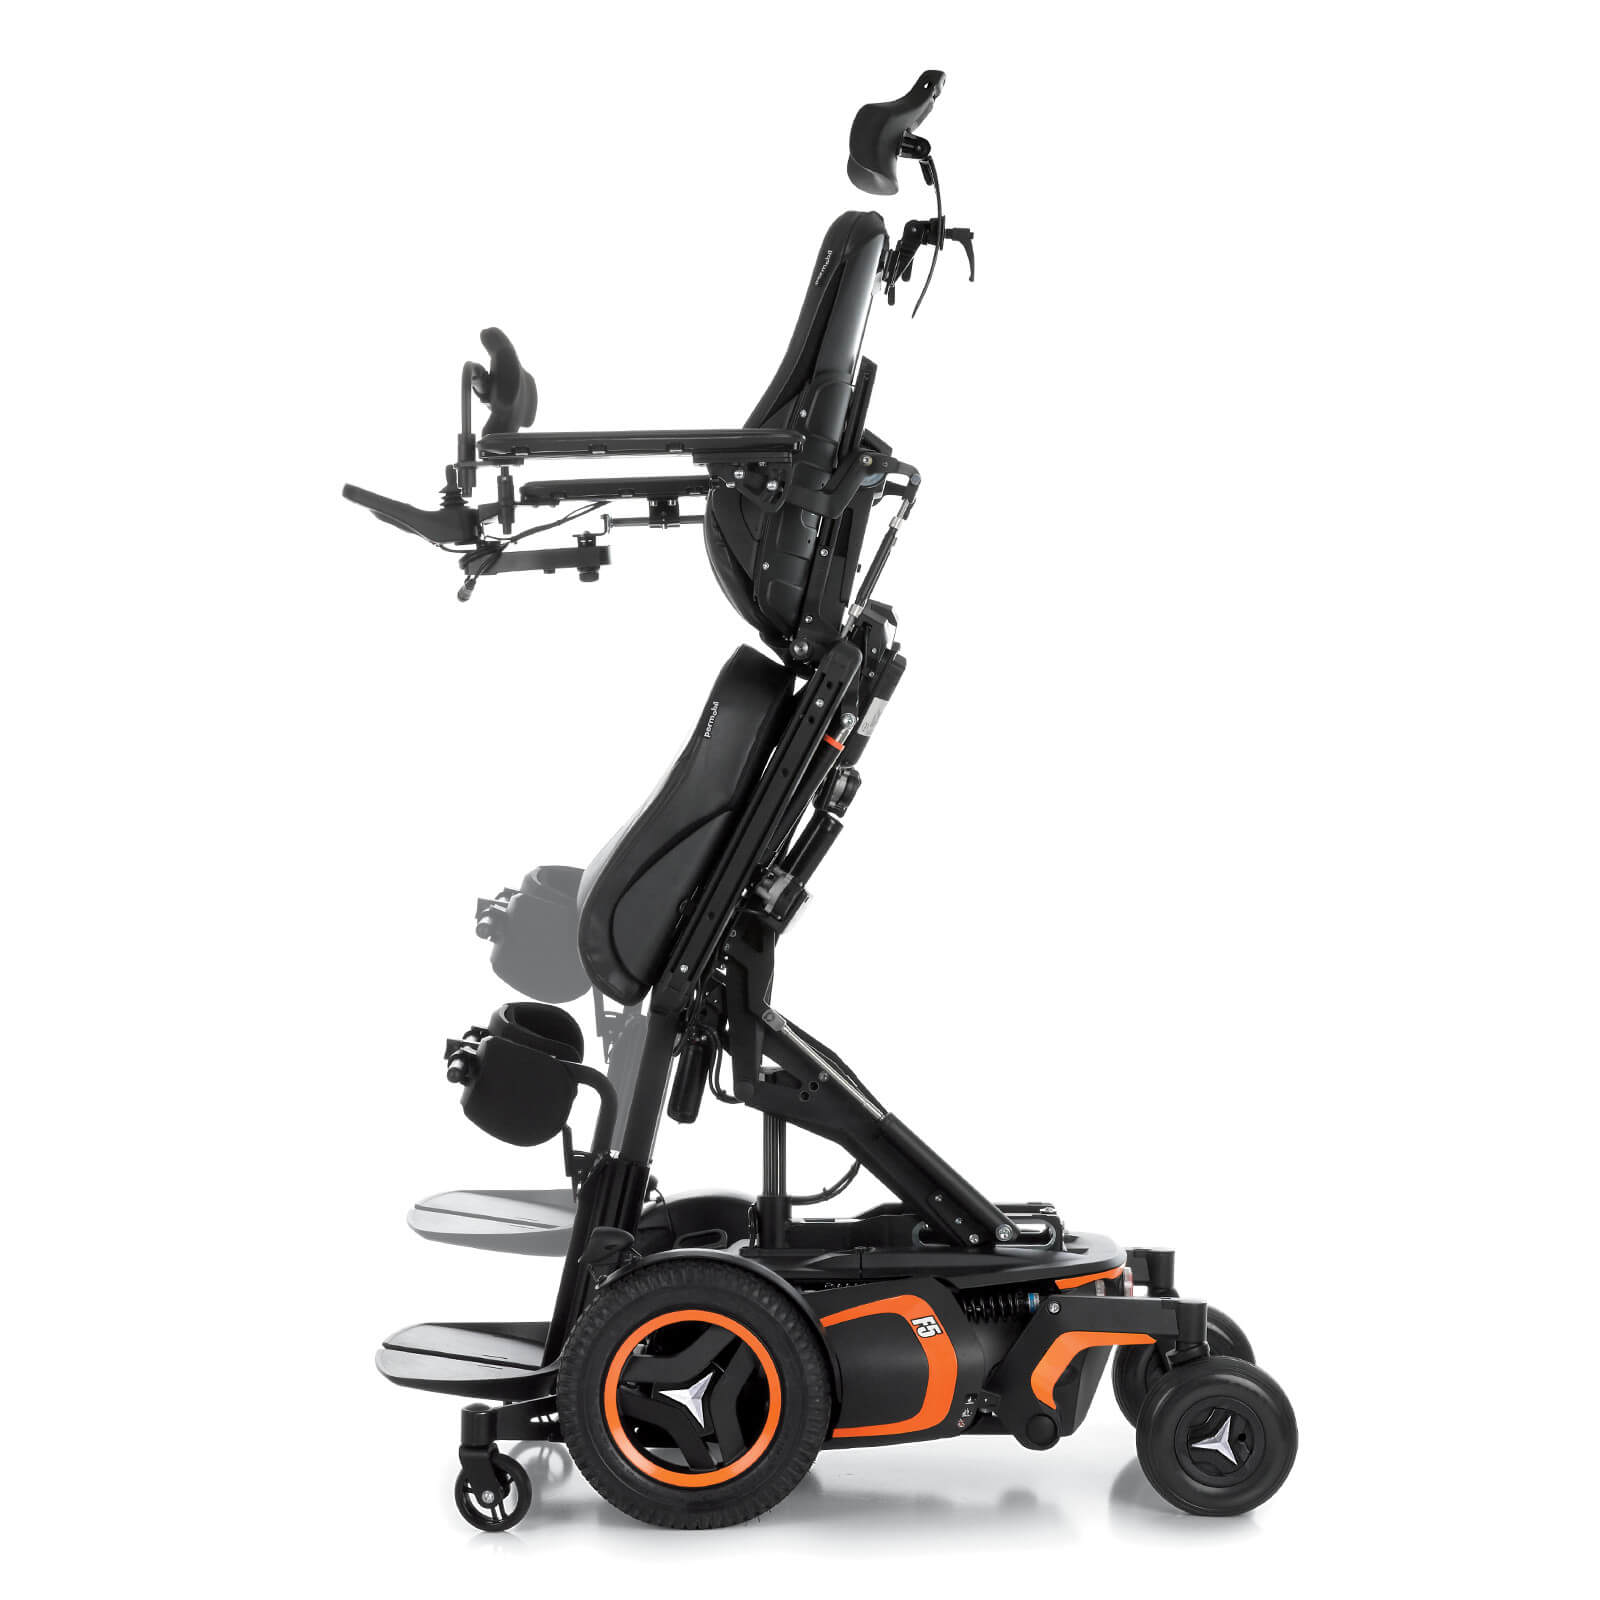 The F5 Corpus VS standing wheelchair with orange accents is shown in the standing position. It has black rehab seating & a headrest.